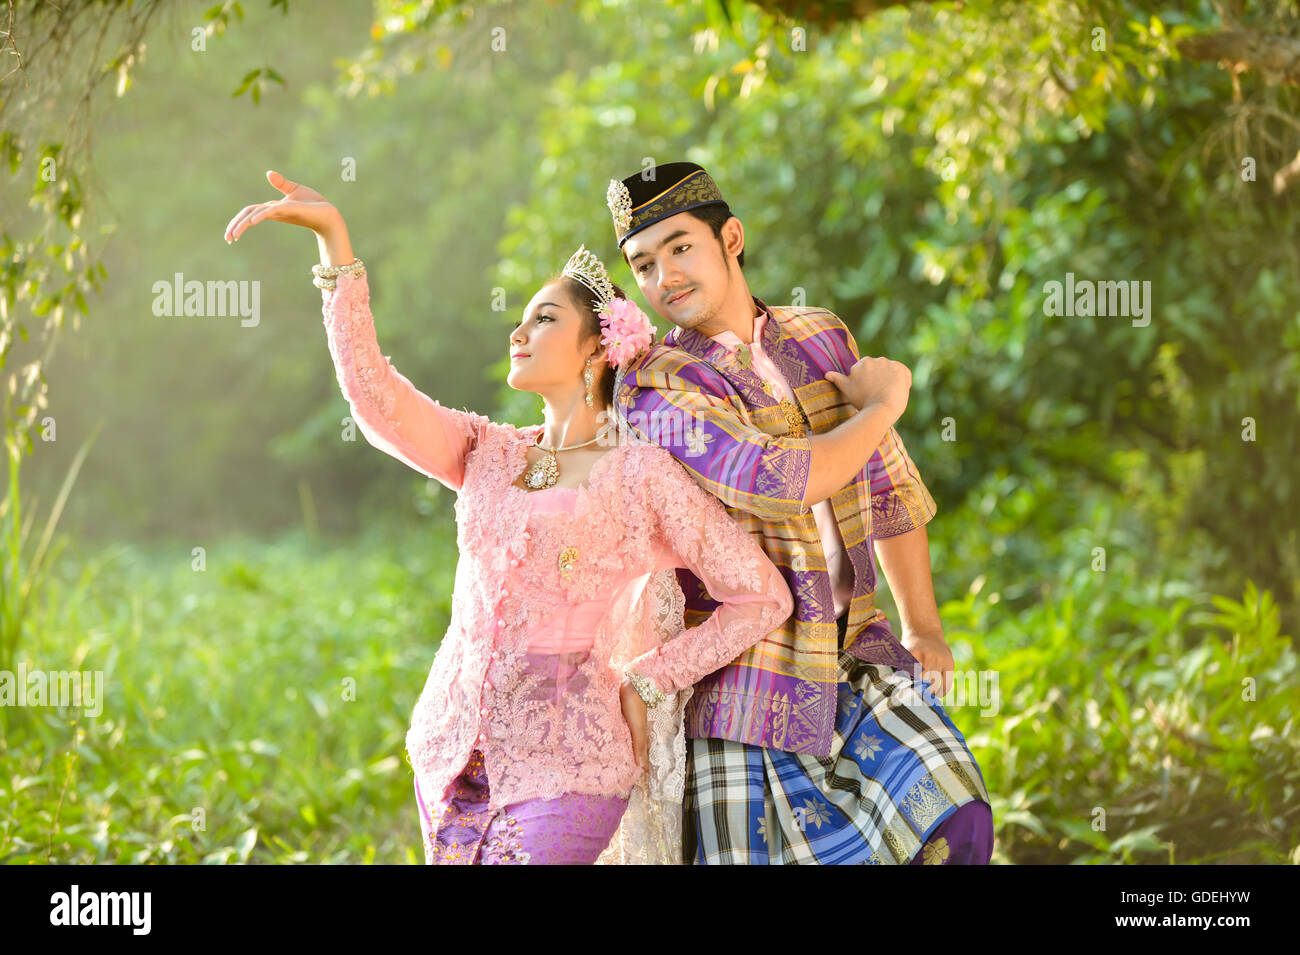 Man and woman in traditional clothing dancing, Asia Stock Photo